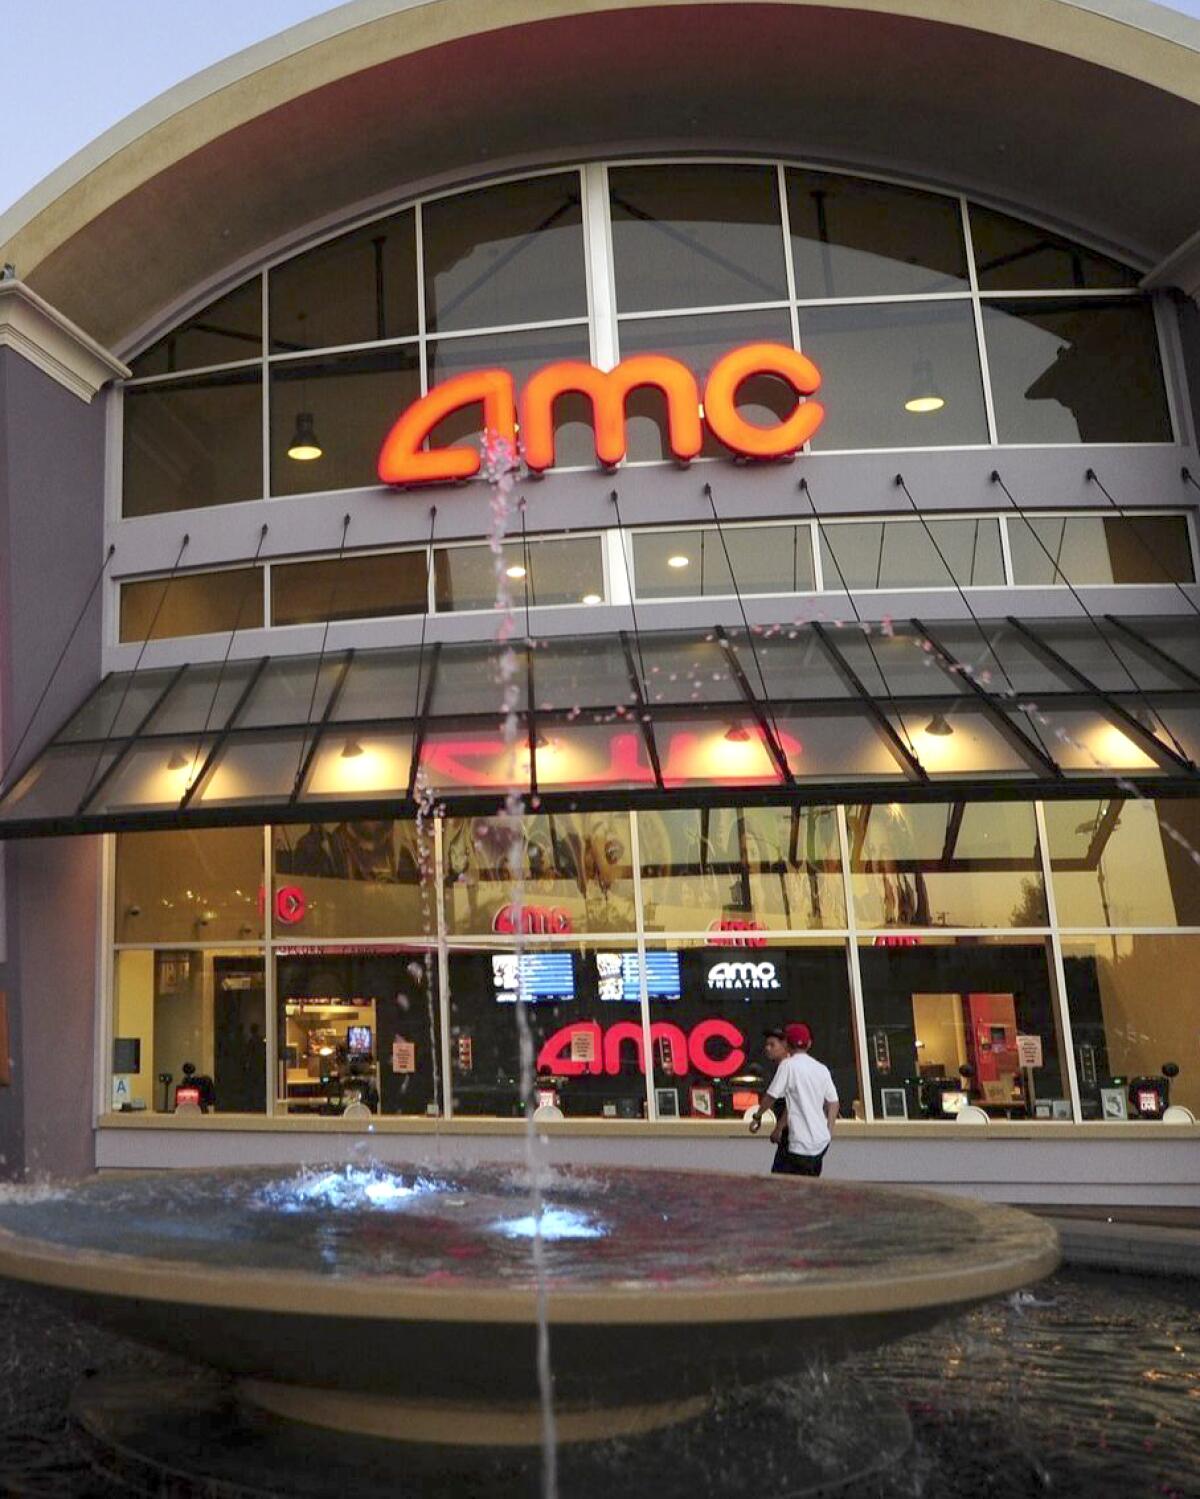 The exterior of an AMC Theatre with a glass front and a water fountain feature in the foreground